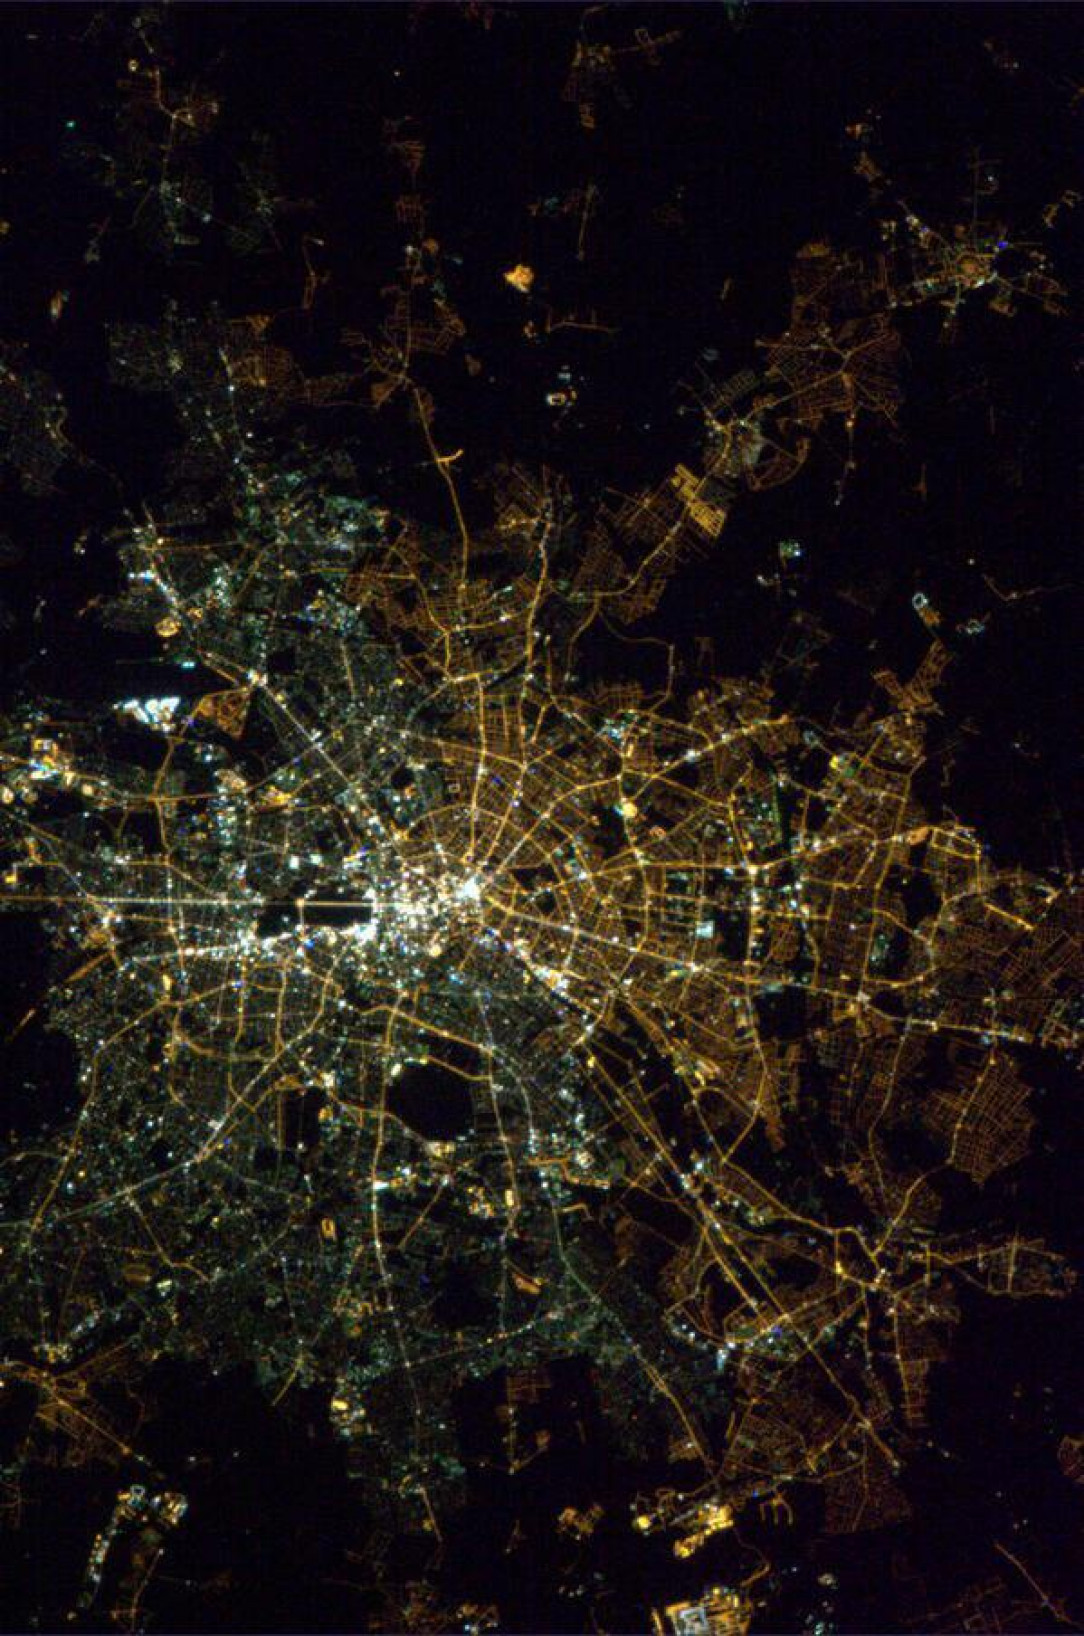 West and East Berlin, the division is still visible from space